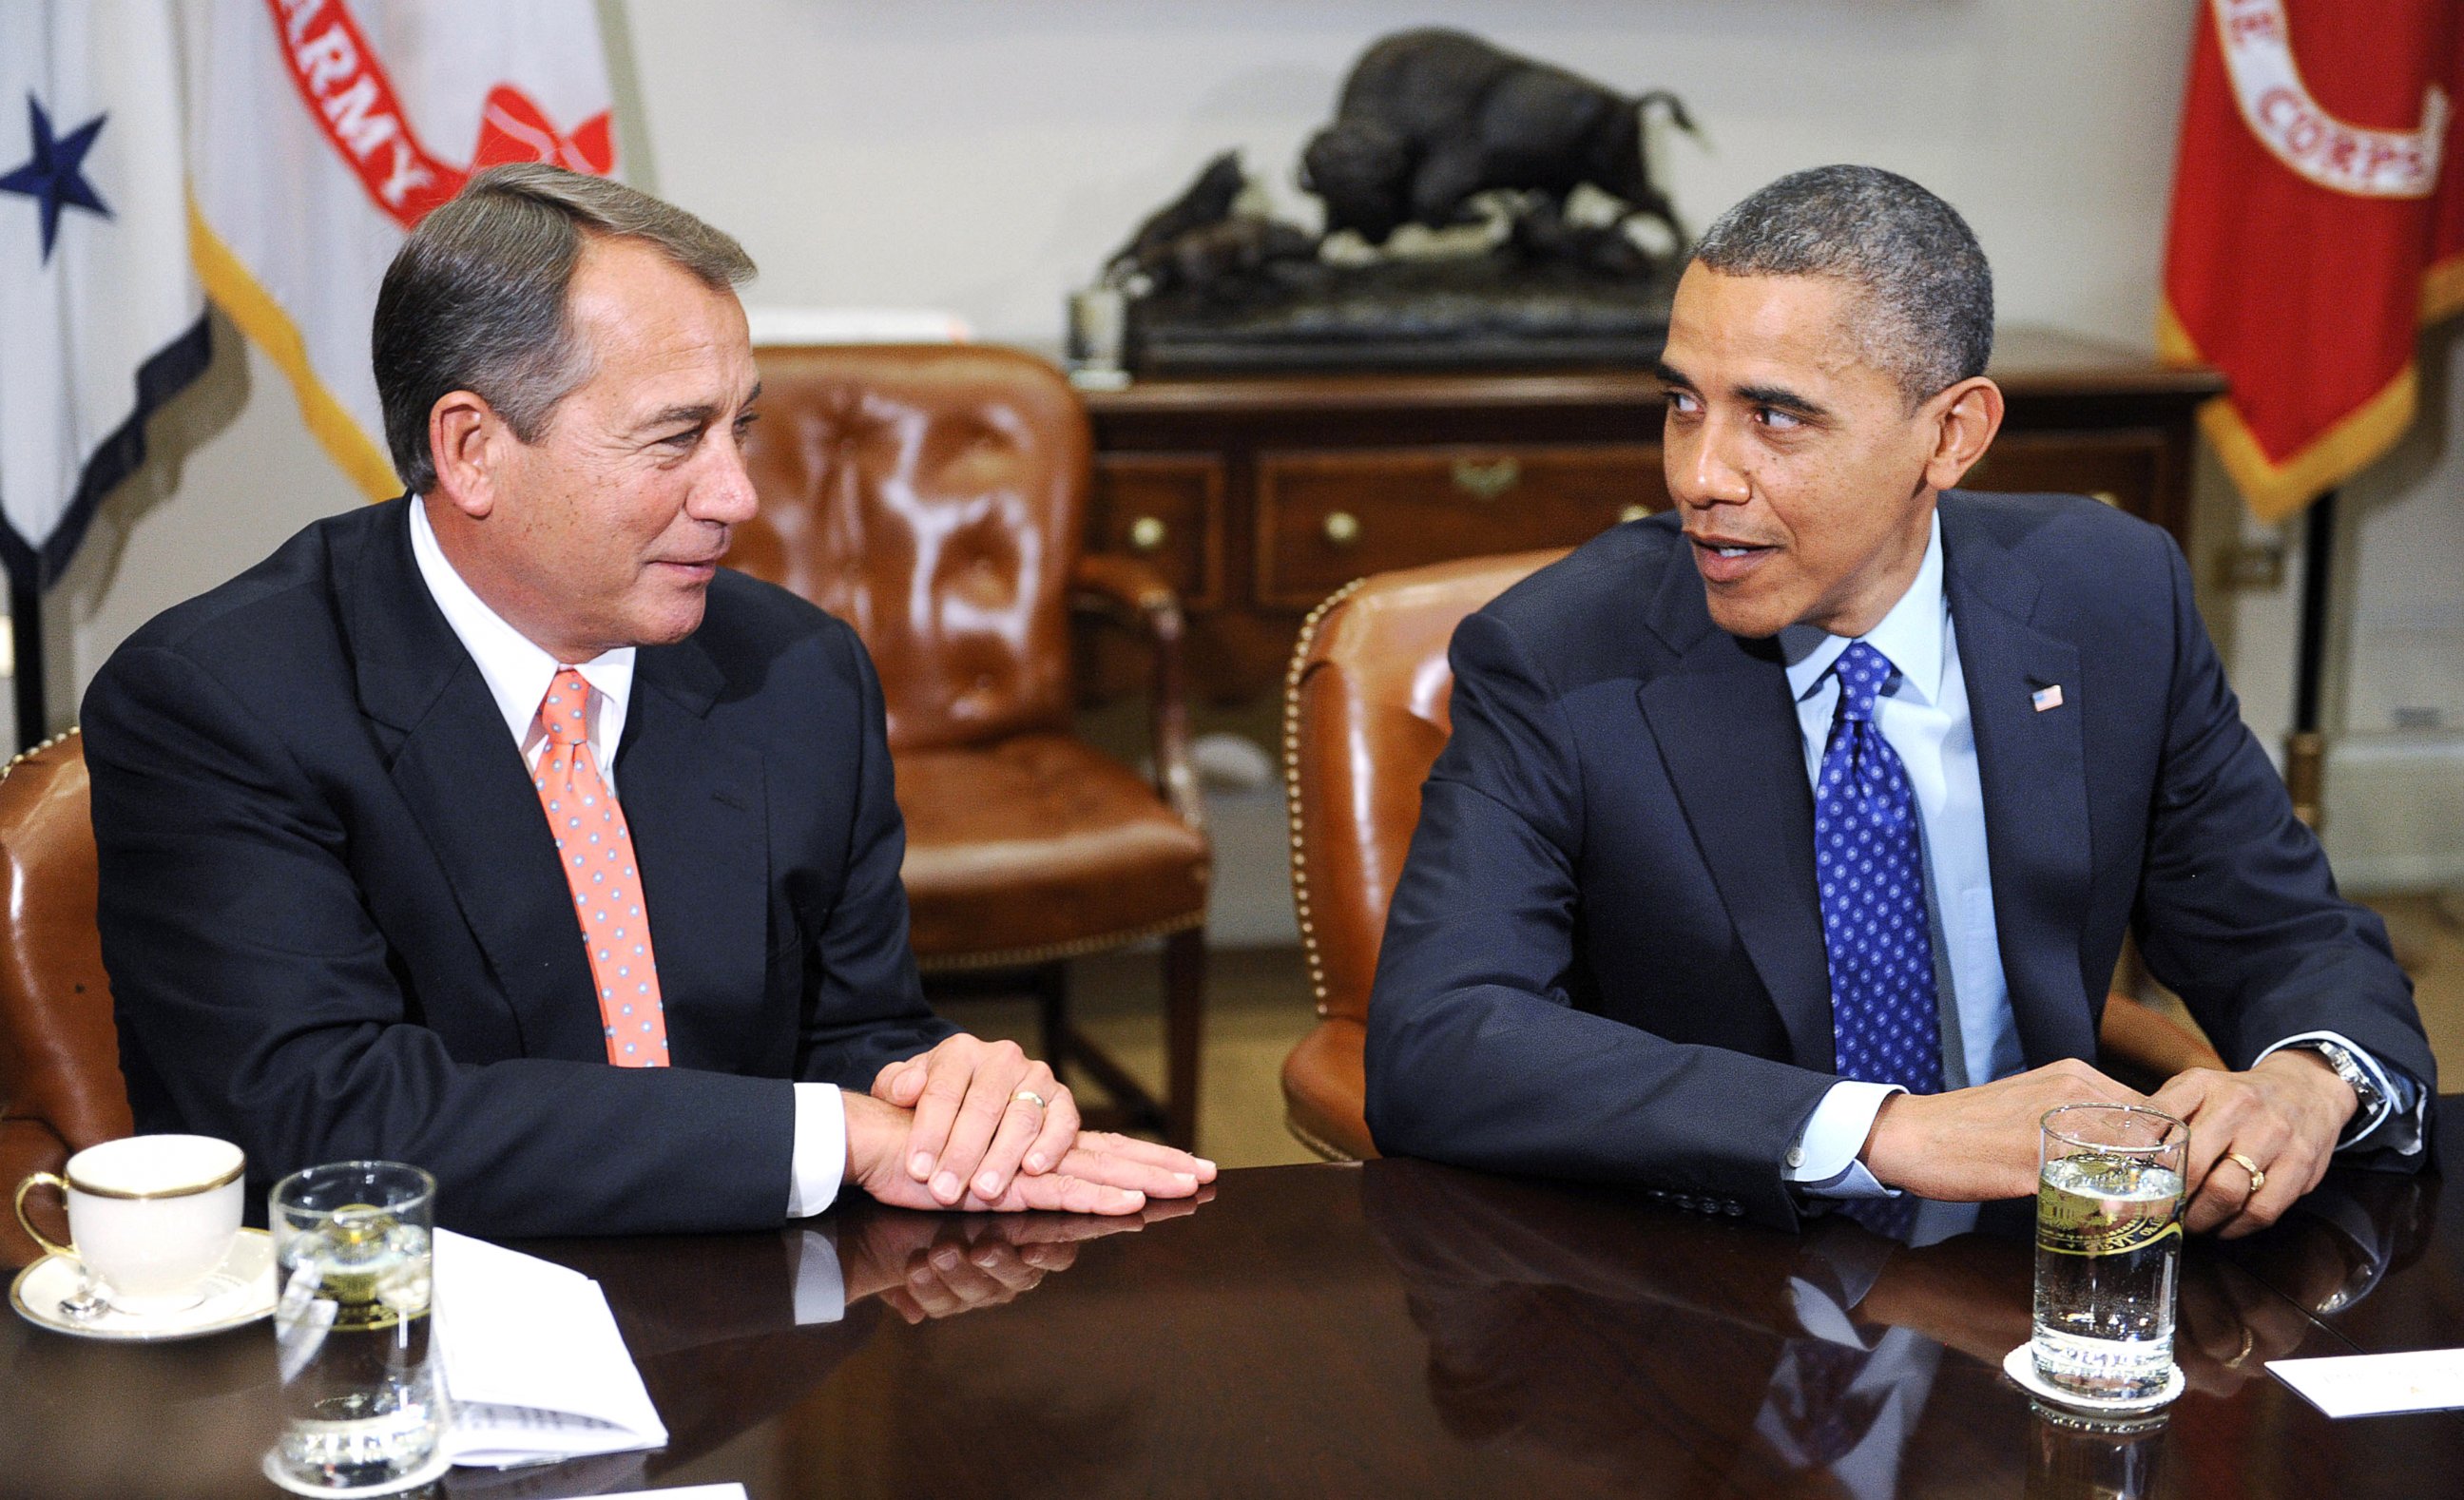 PHOTO: President Barack Obama, right, sits with Speaker of the House John Boehner during a meeting 